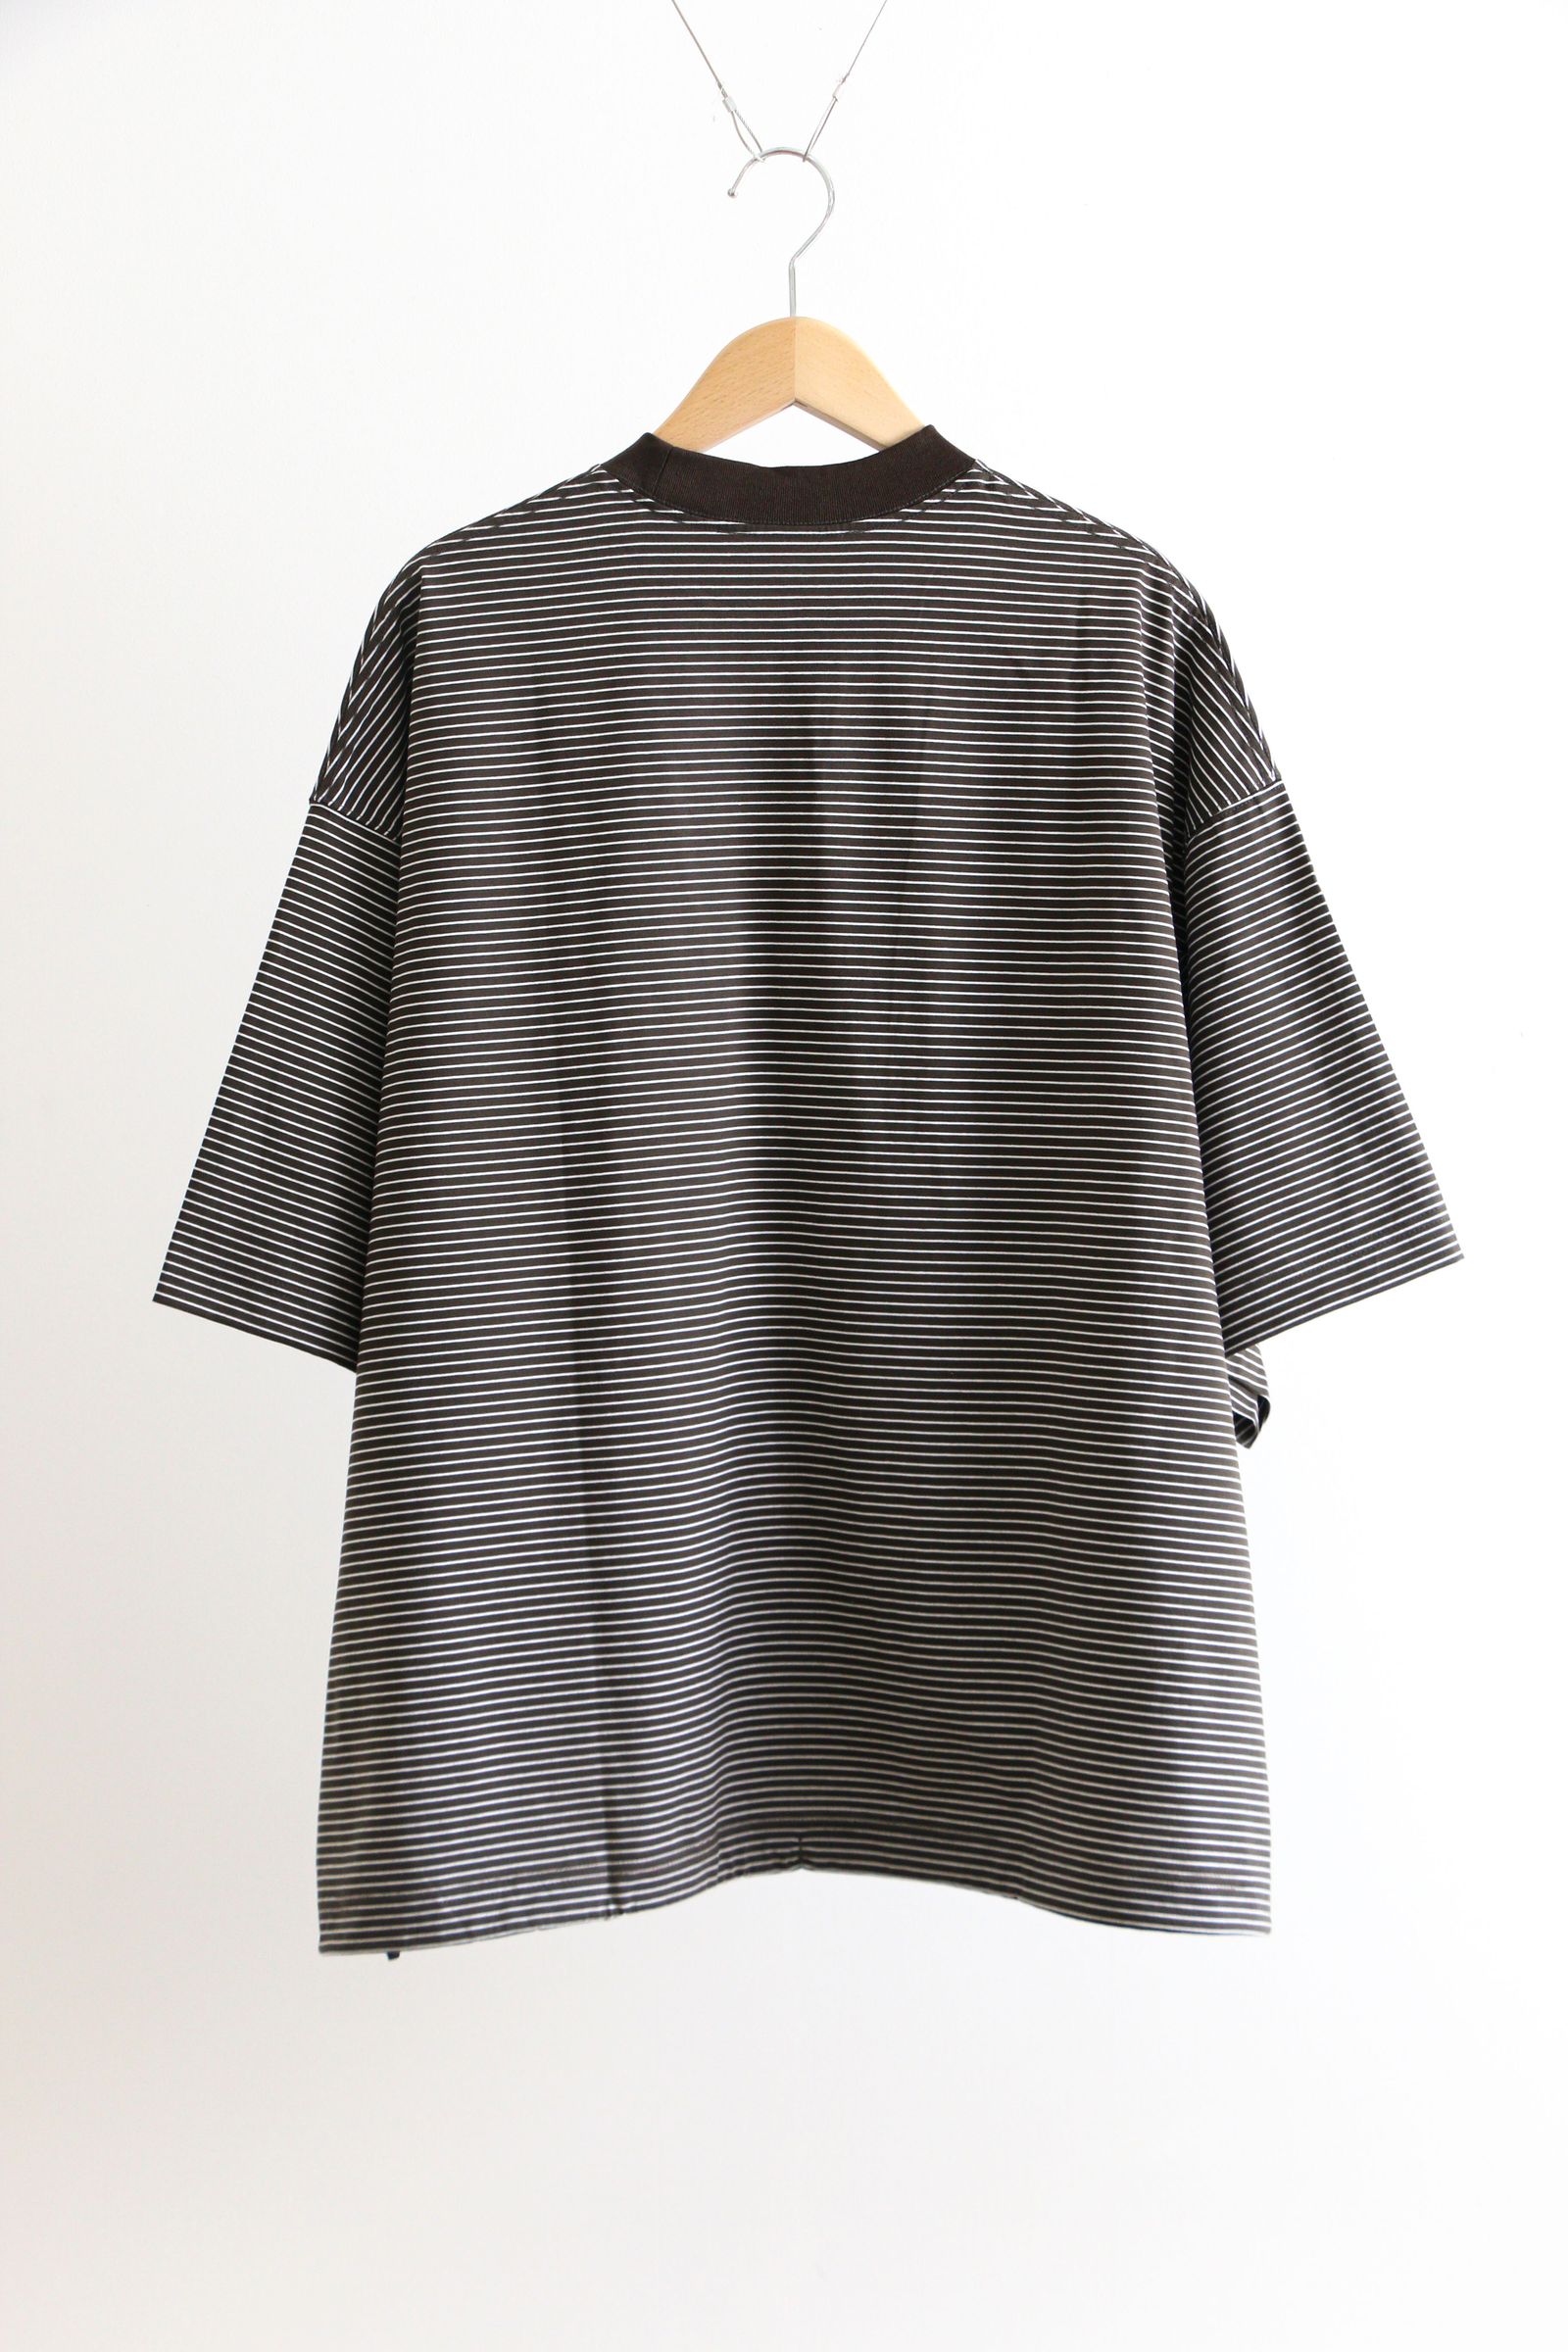 is-ness - BALLOON T SHIRT BROWN x WHITE / バルーンTシャツ